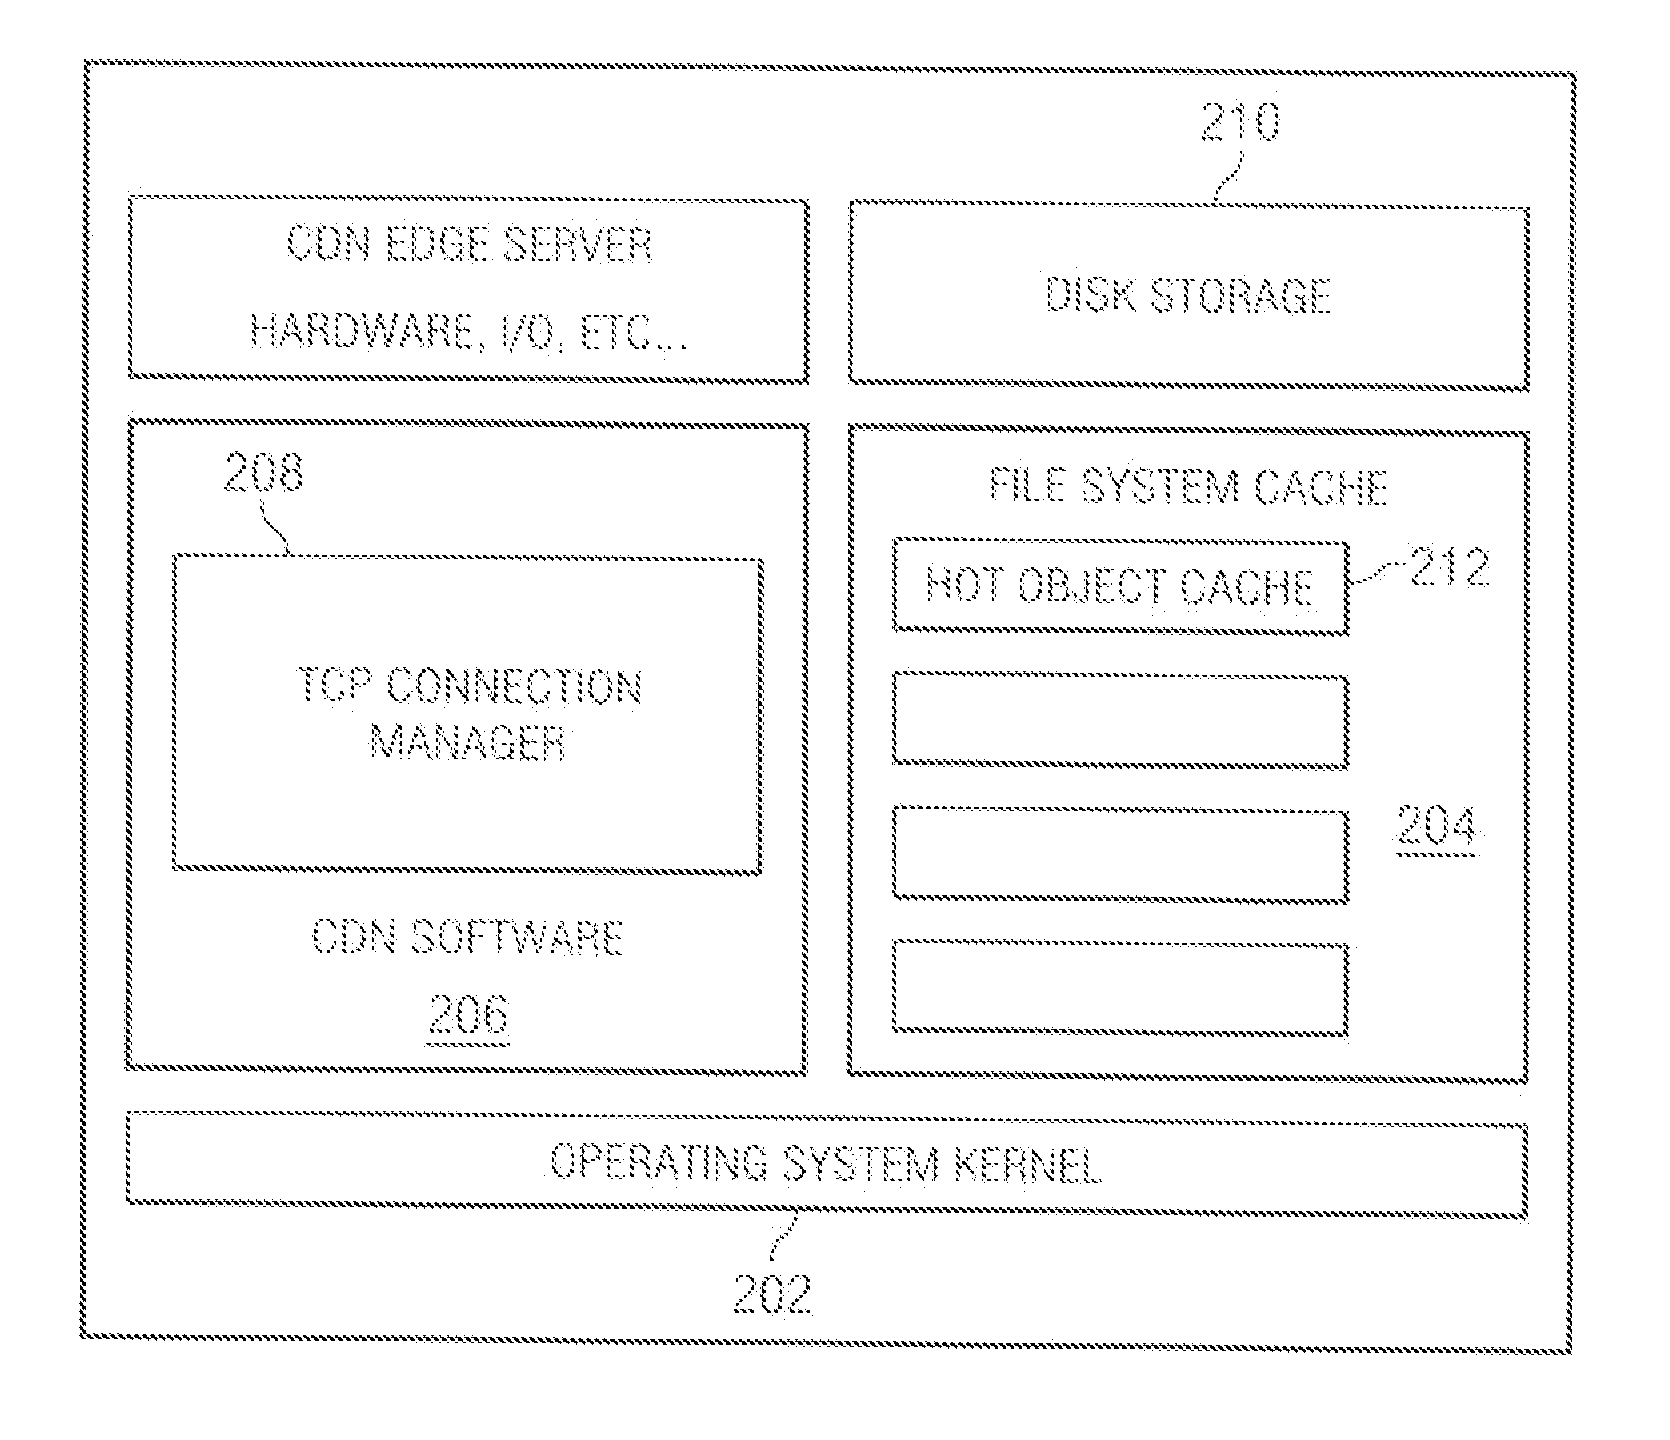 Edge side components and application programming environment for building and delivering highly distributed heterogenous component-based web applications